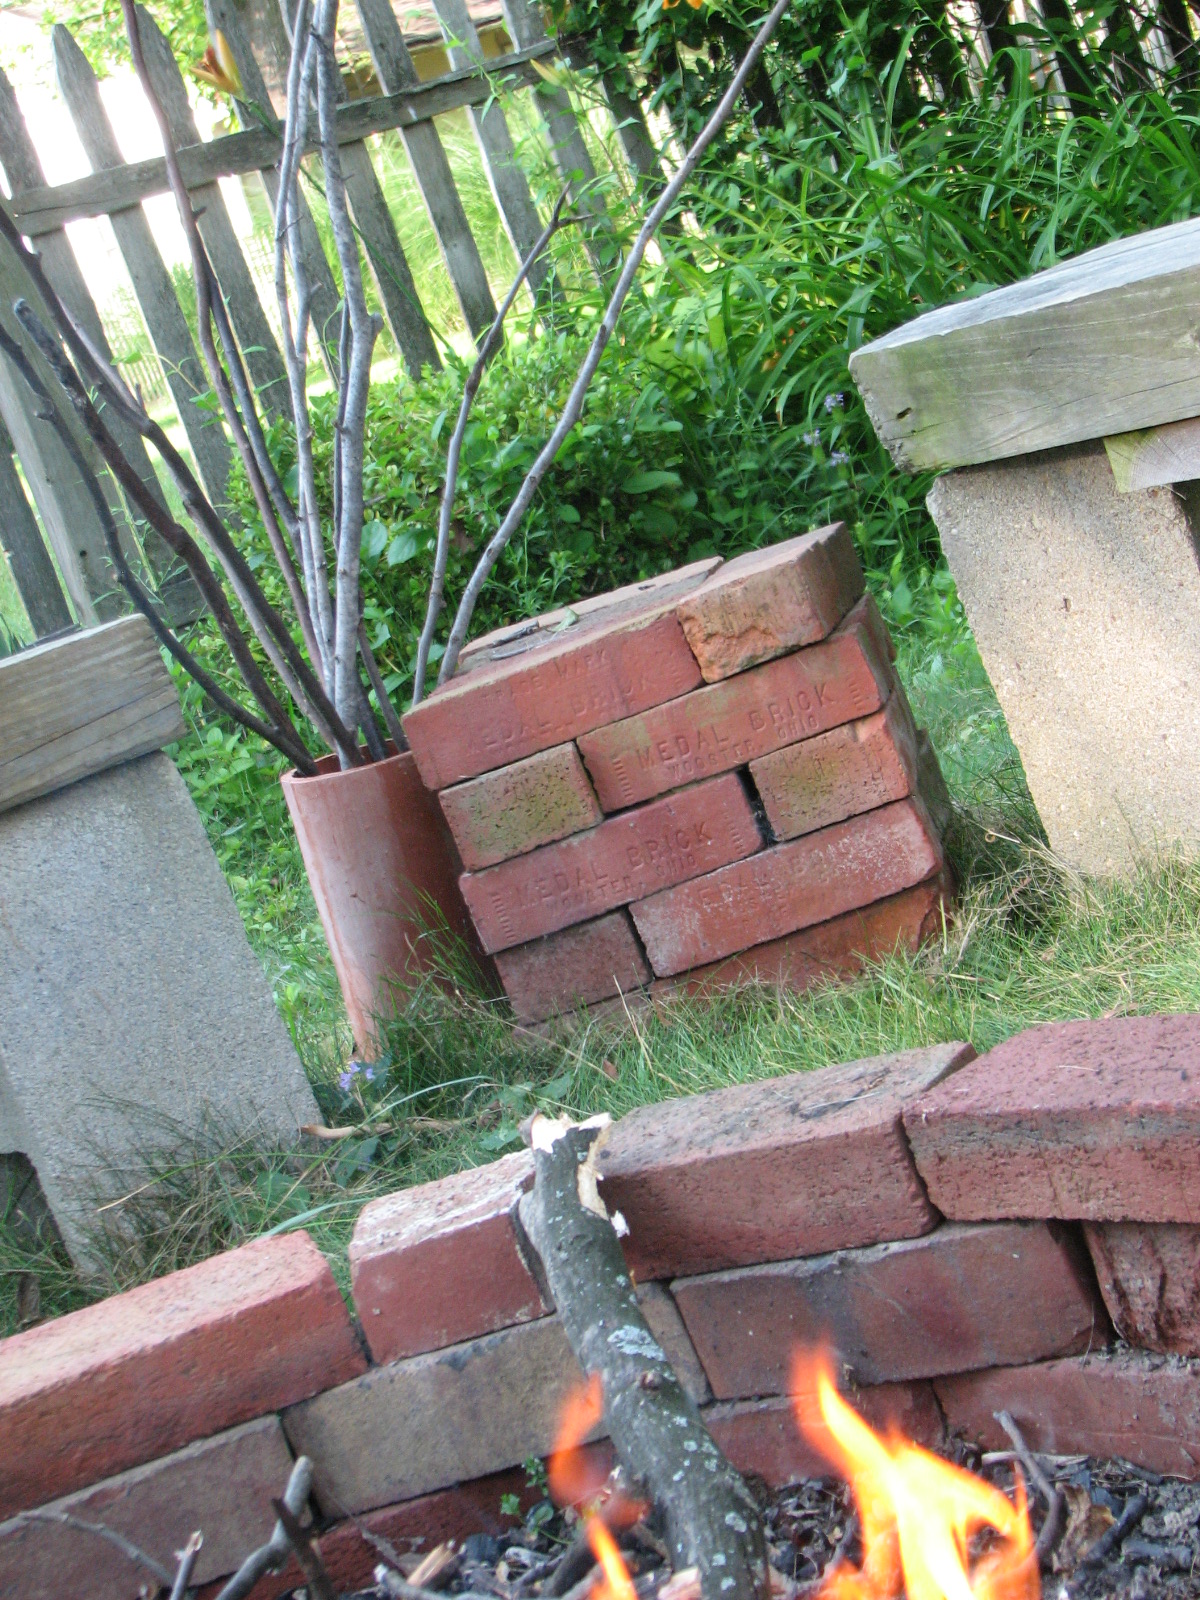 Budget Fire Pit From Reclaimed Brick, How To Make A Homemade Fire Pit Out Of Bricks